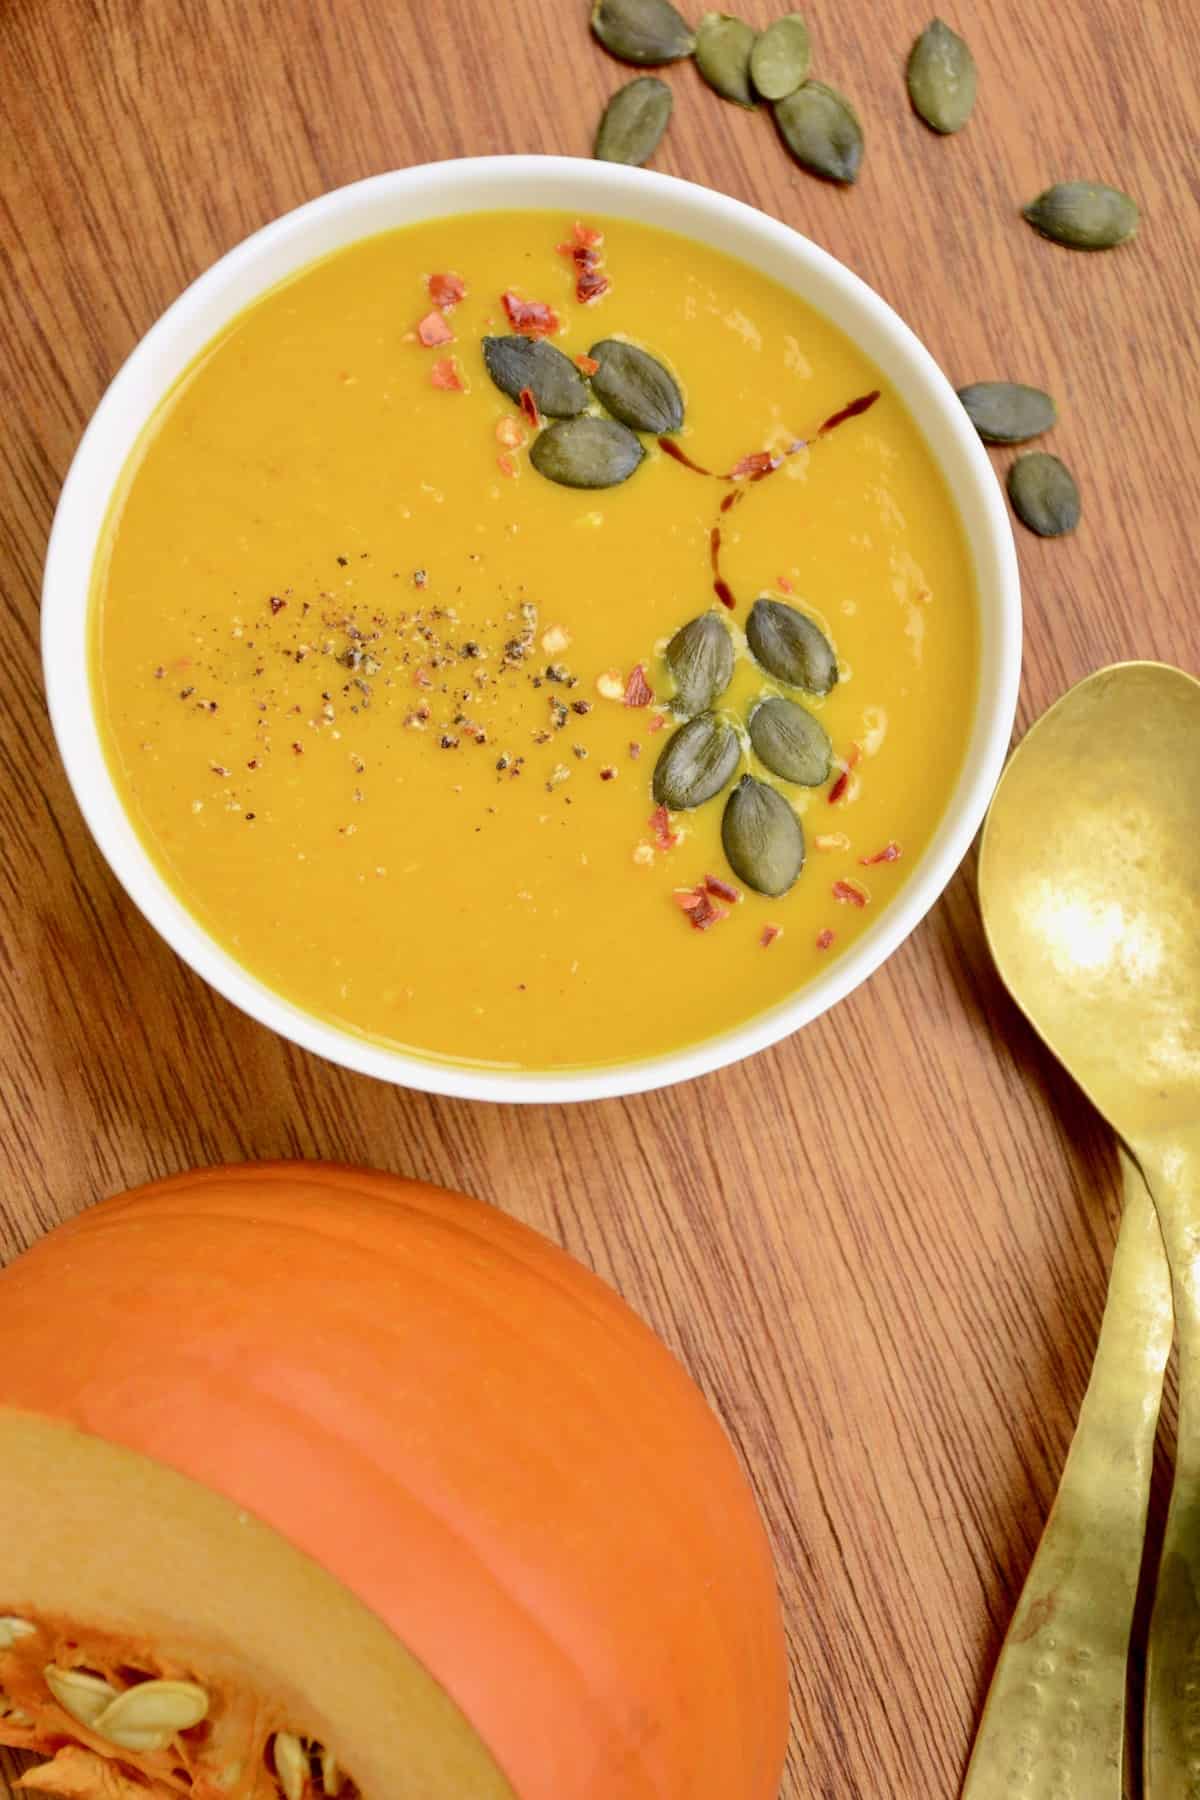 A bowl of soup next to a wedge of pumpkin.